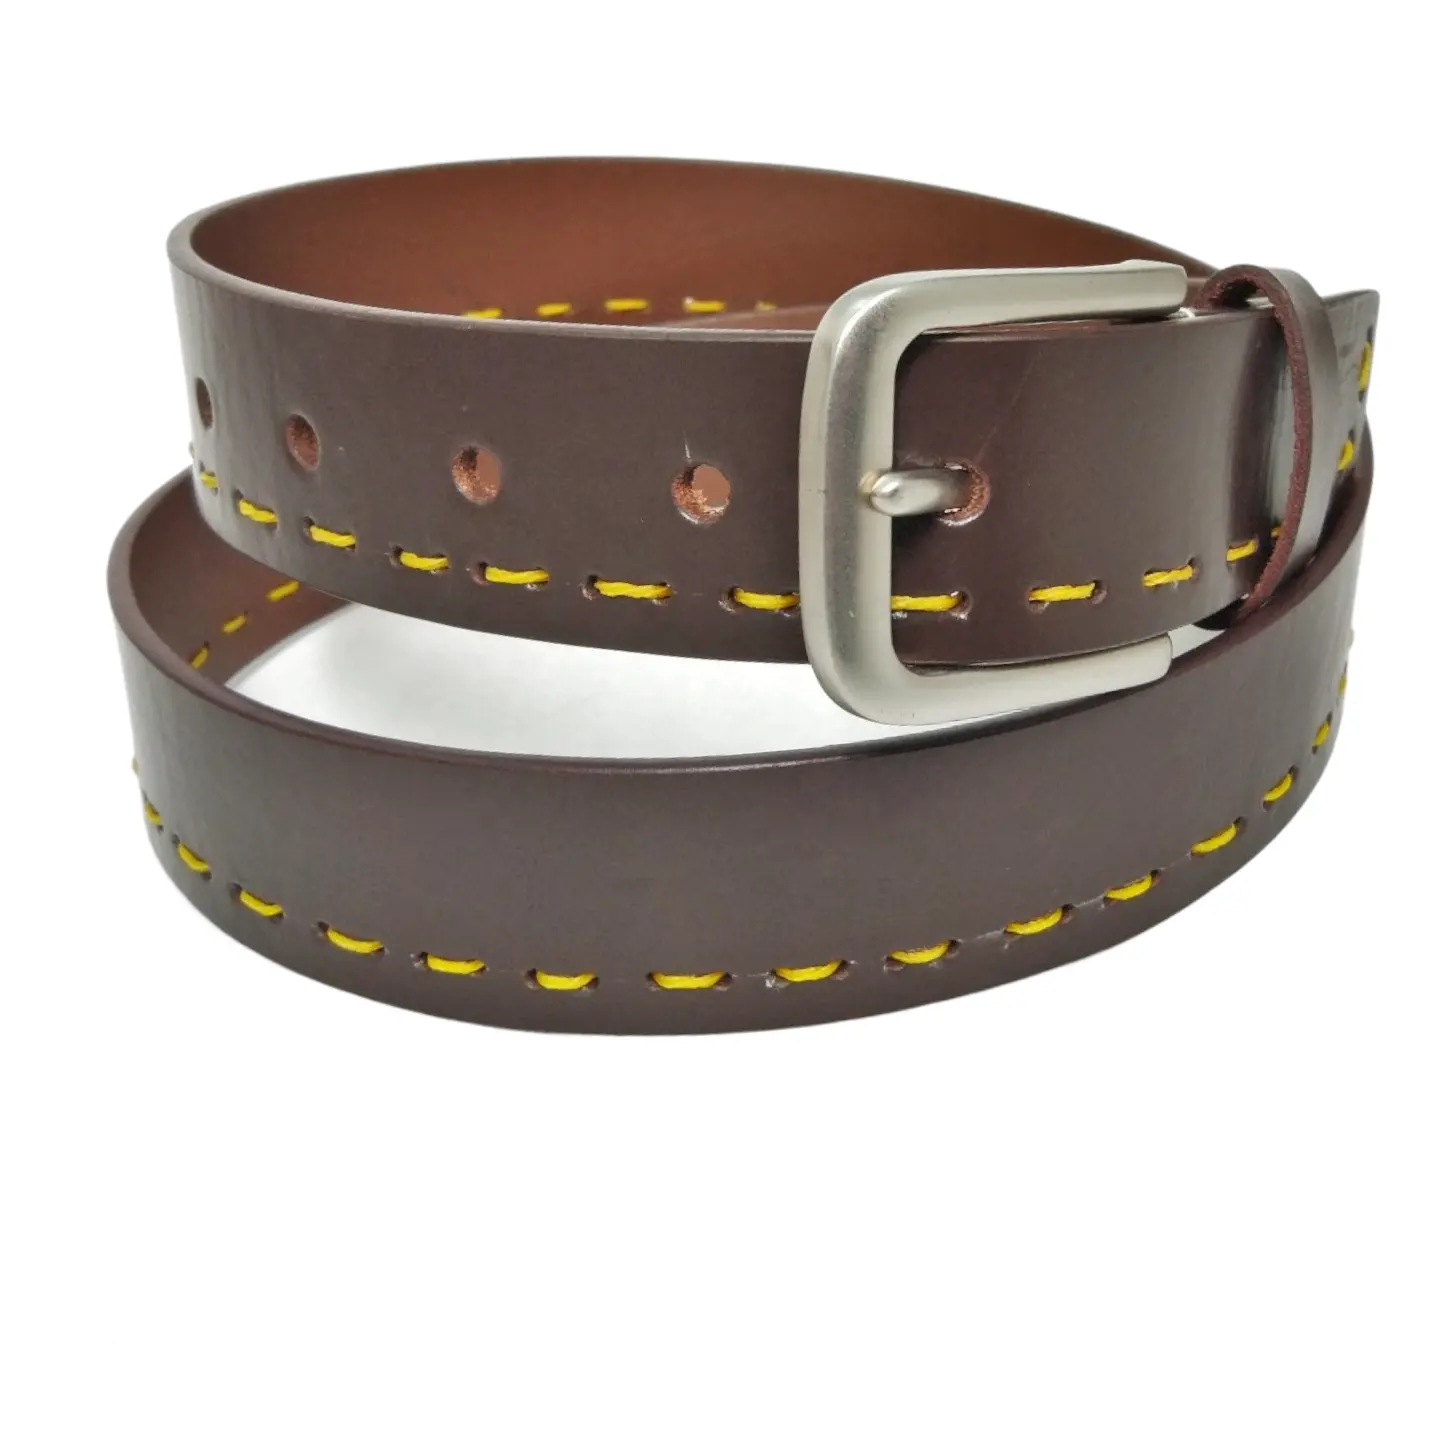 Men's Economical Leather belt for Whole sale Tan leather belt strap with Yellow thick hand stitching